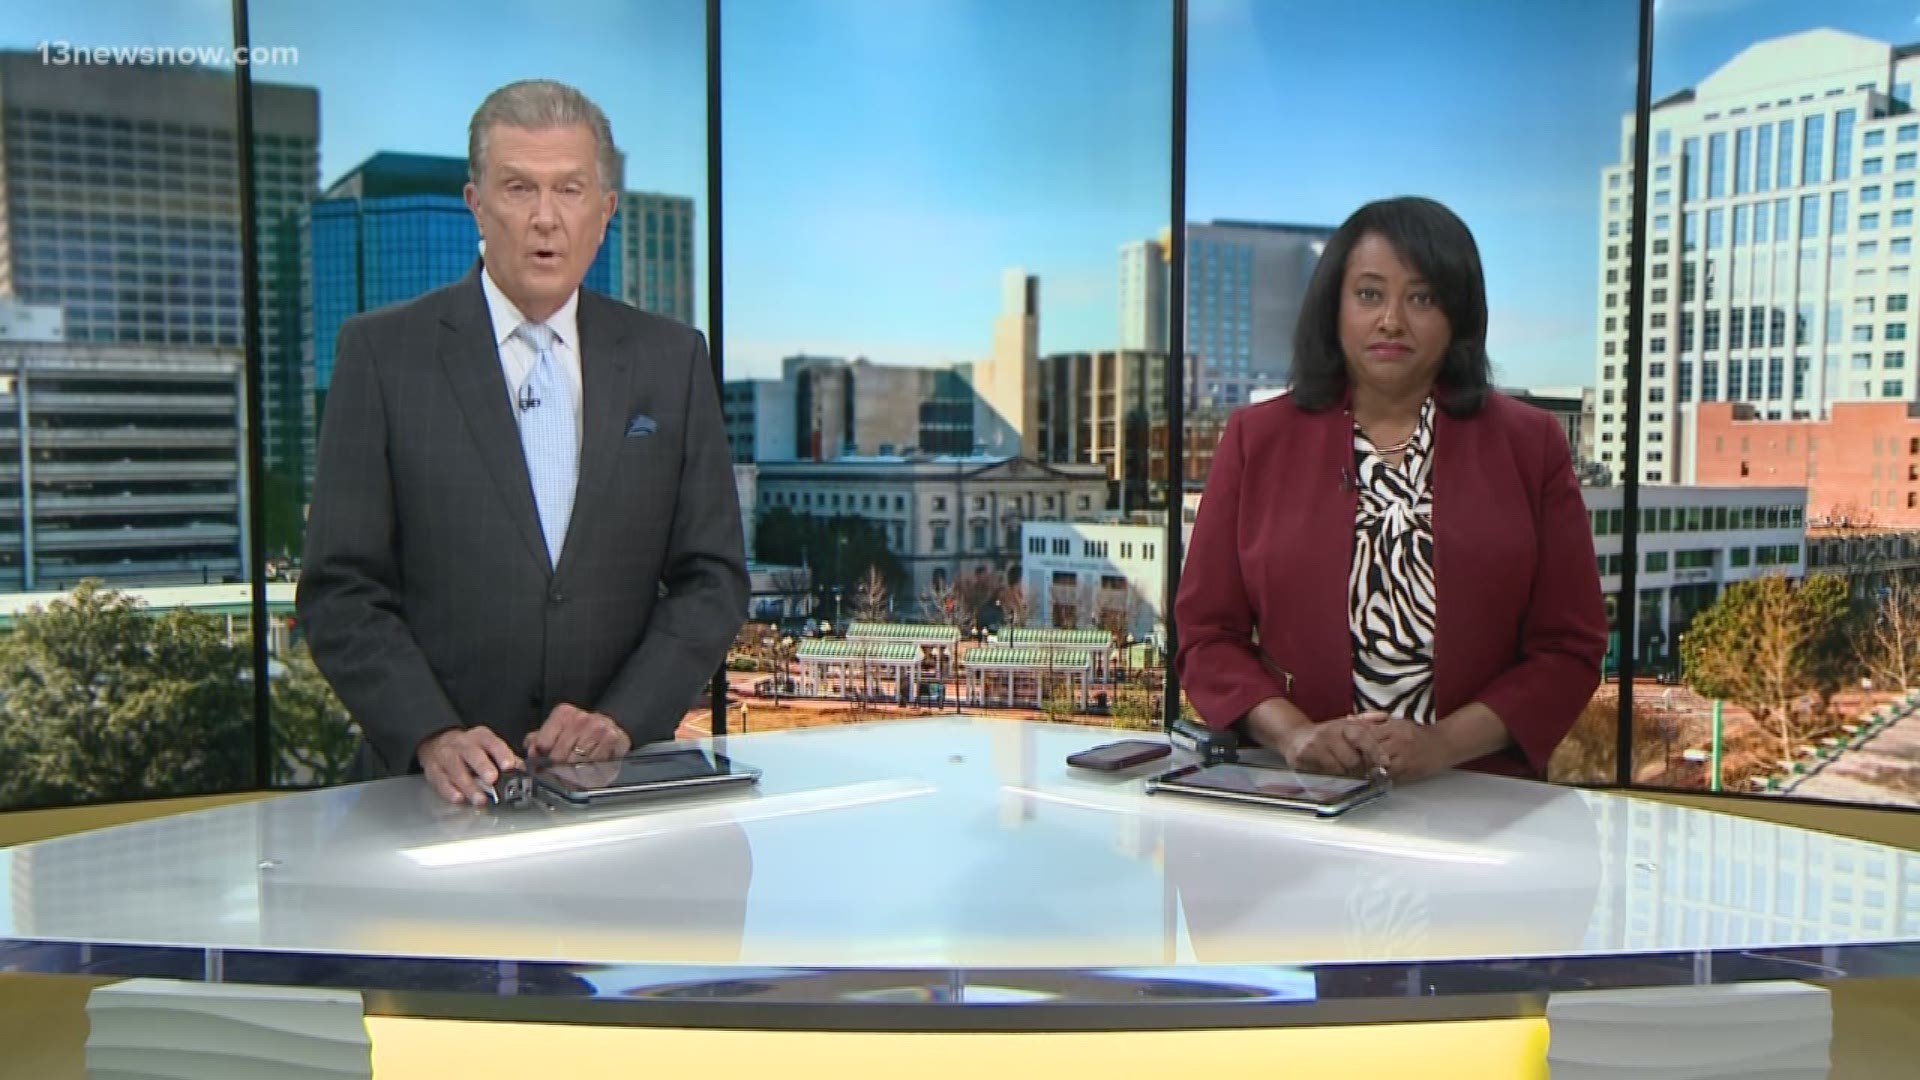 13News Now top headlines at 5 p.m. with Janet Roach and David Alan for May 15.